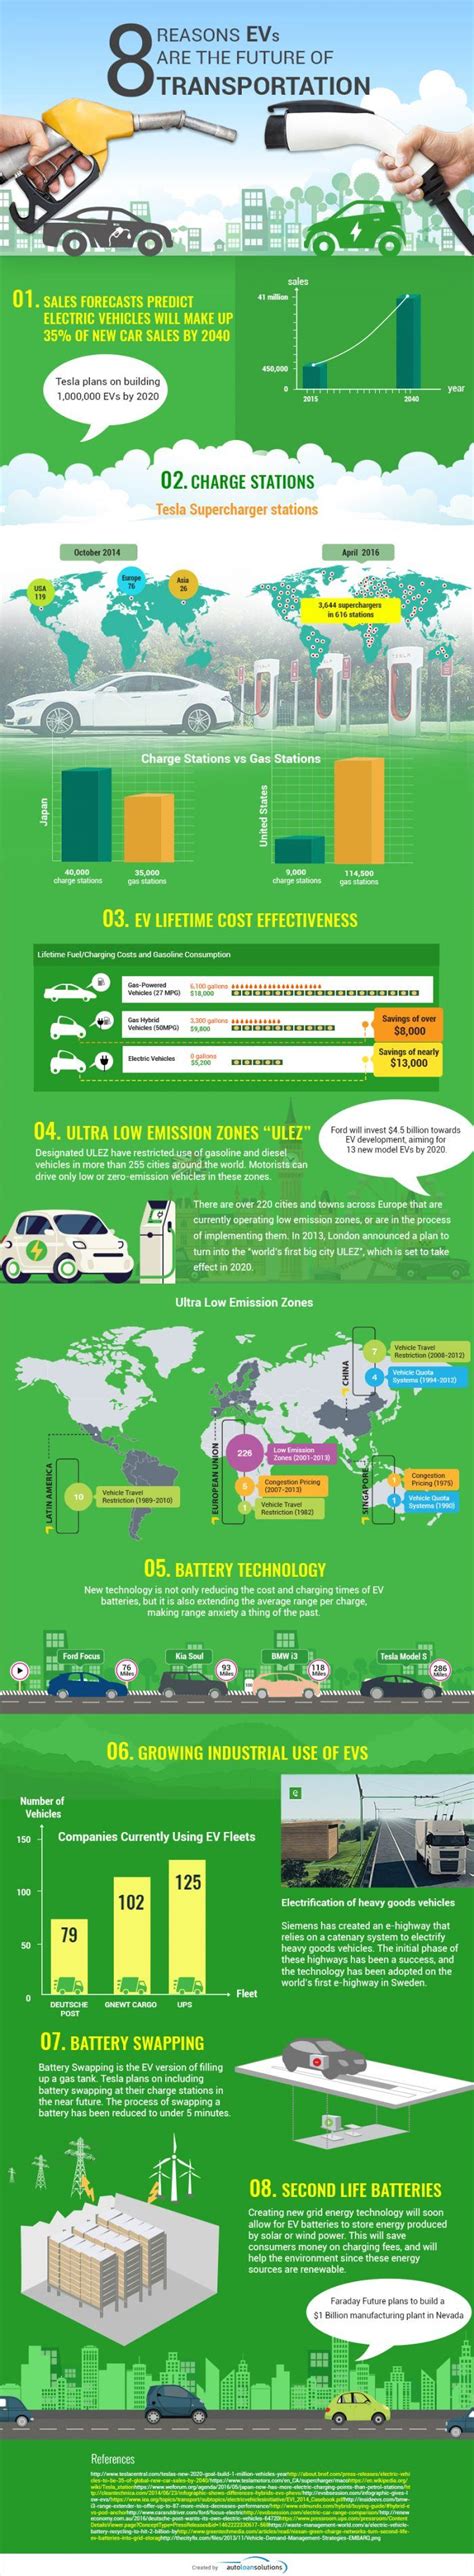 8 Reasons Why EVs Are The Future of Transportation